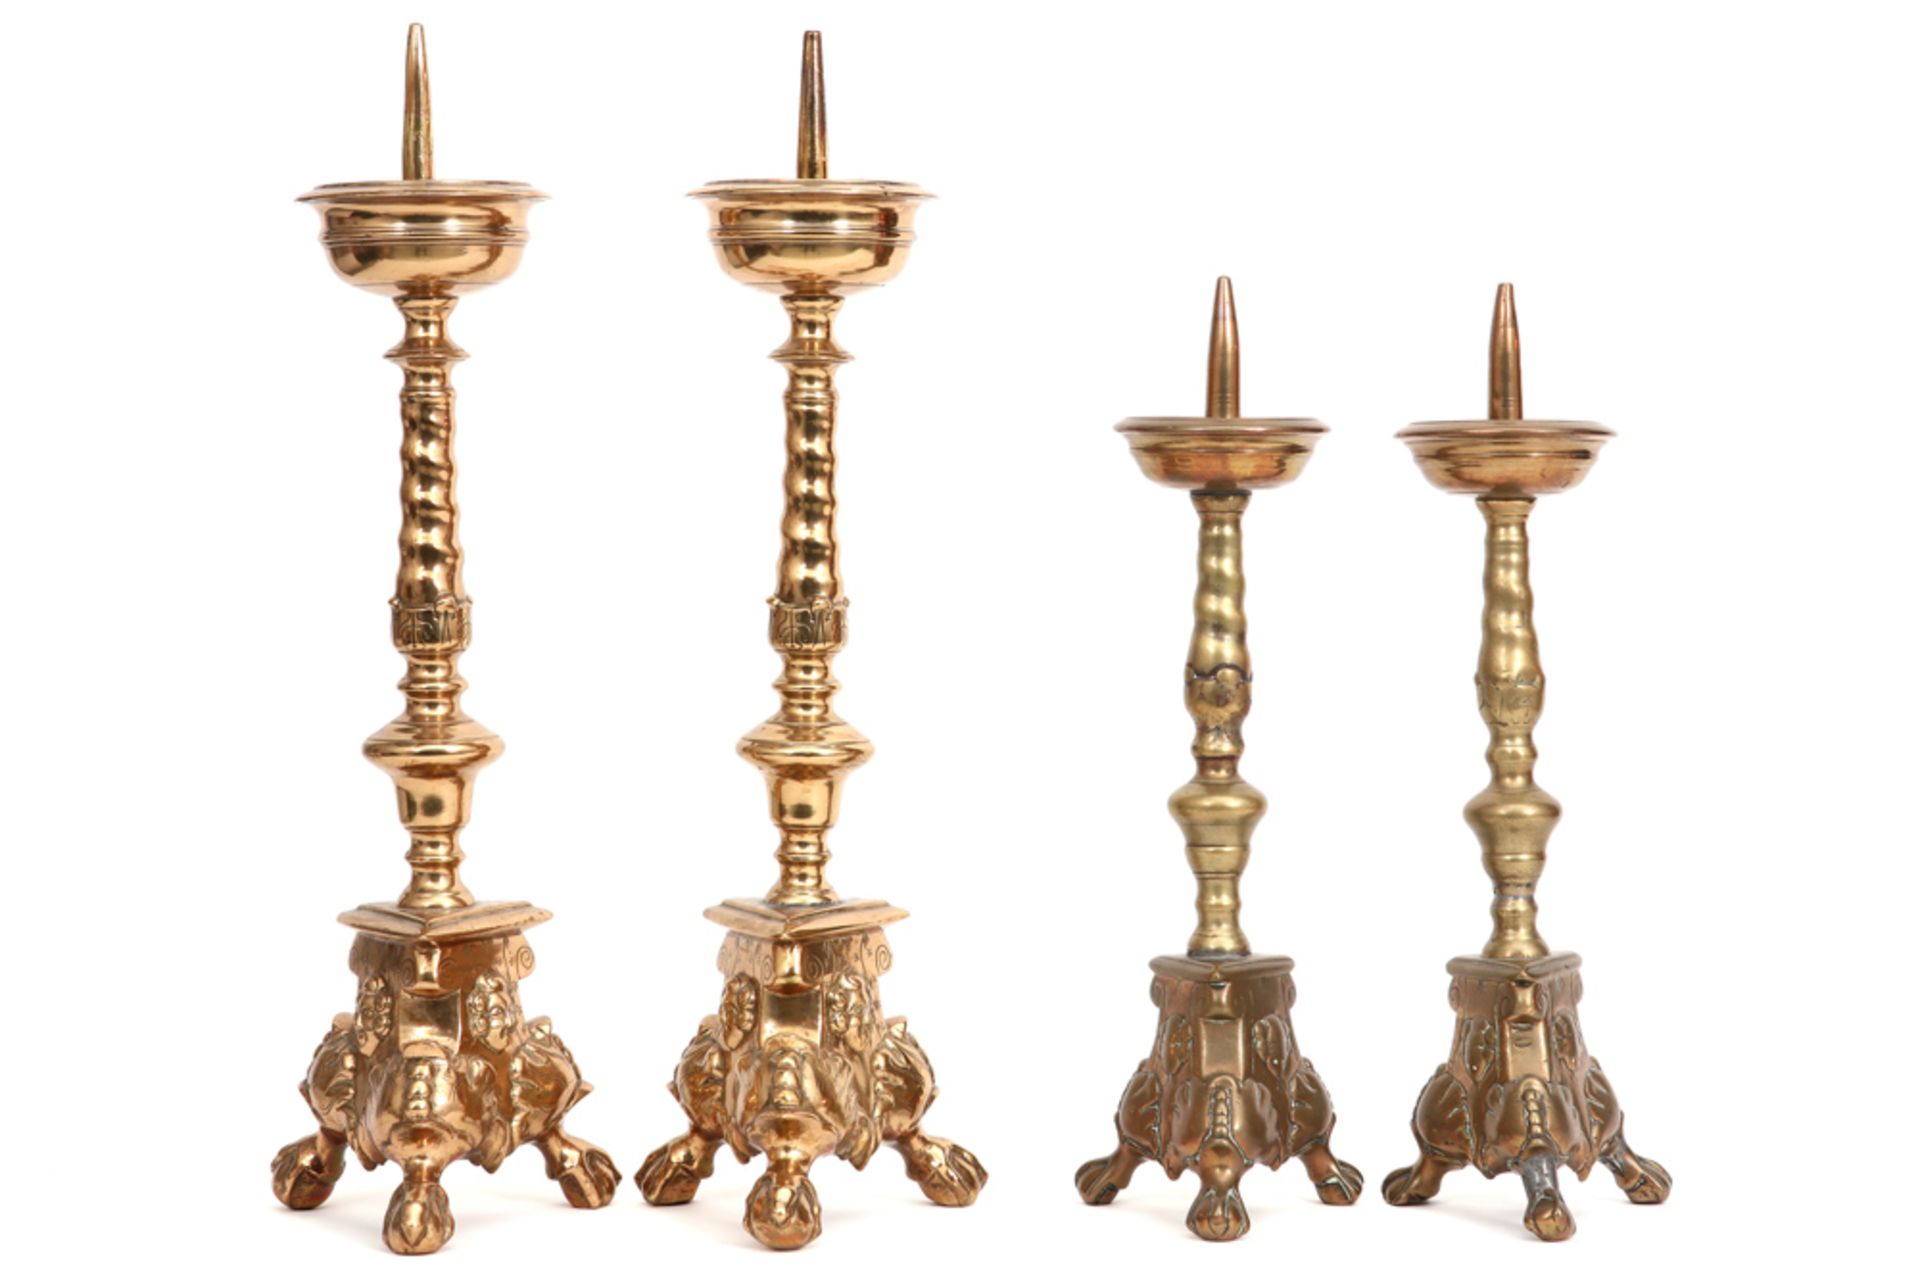 two pairs of brass 17th Cent. Flemish candlesticks with certificate and buyer's note of antique